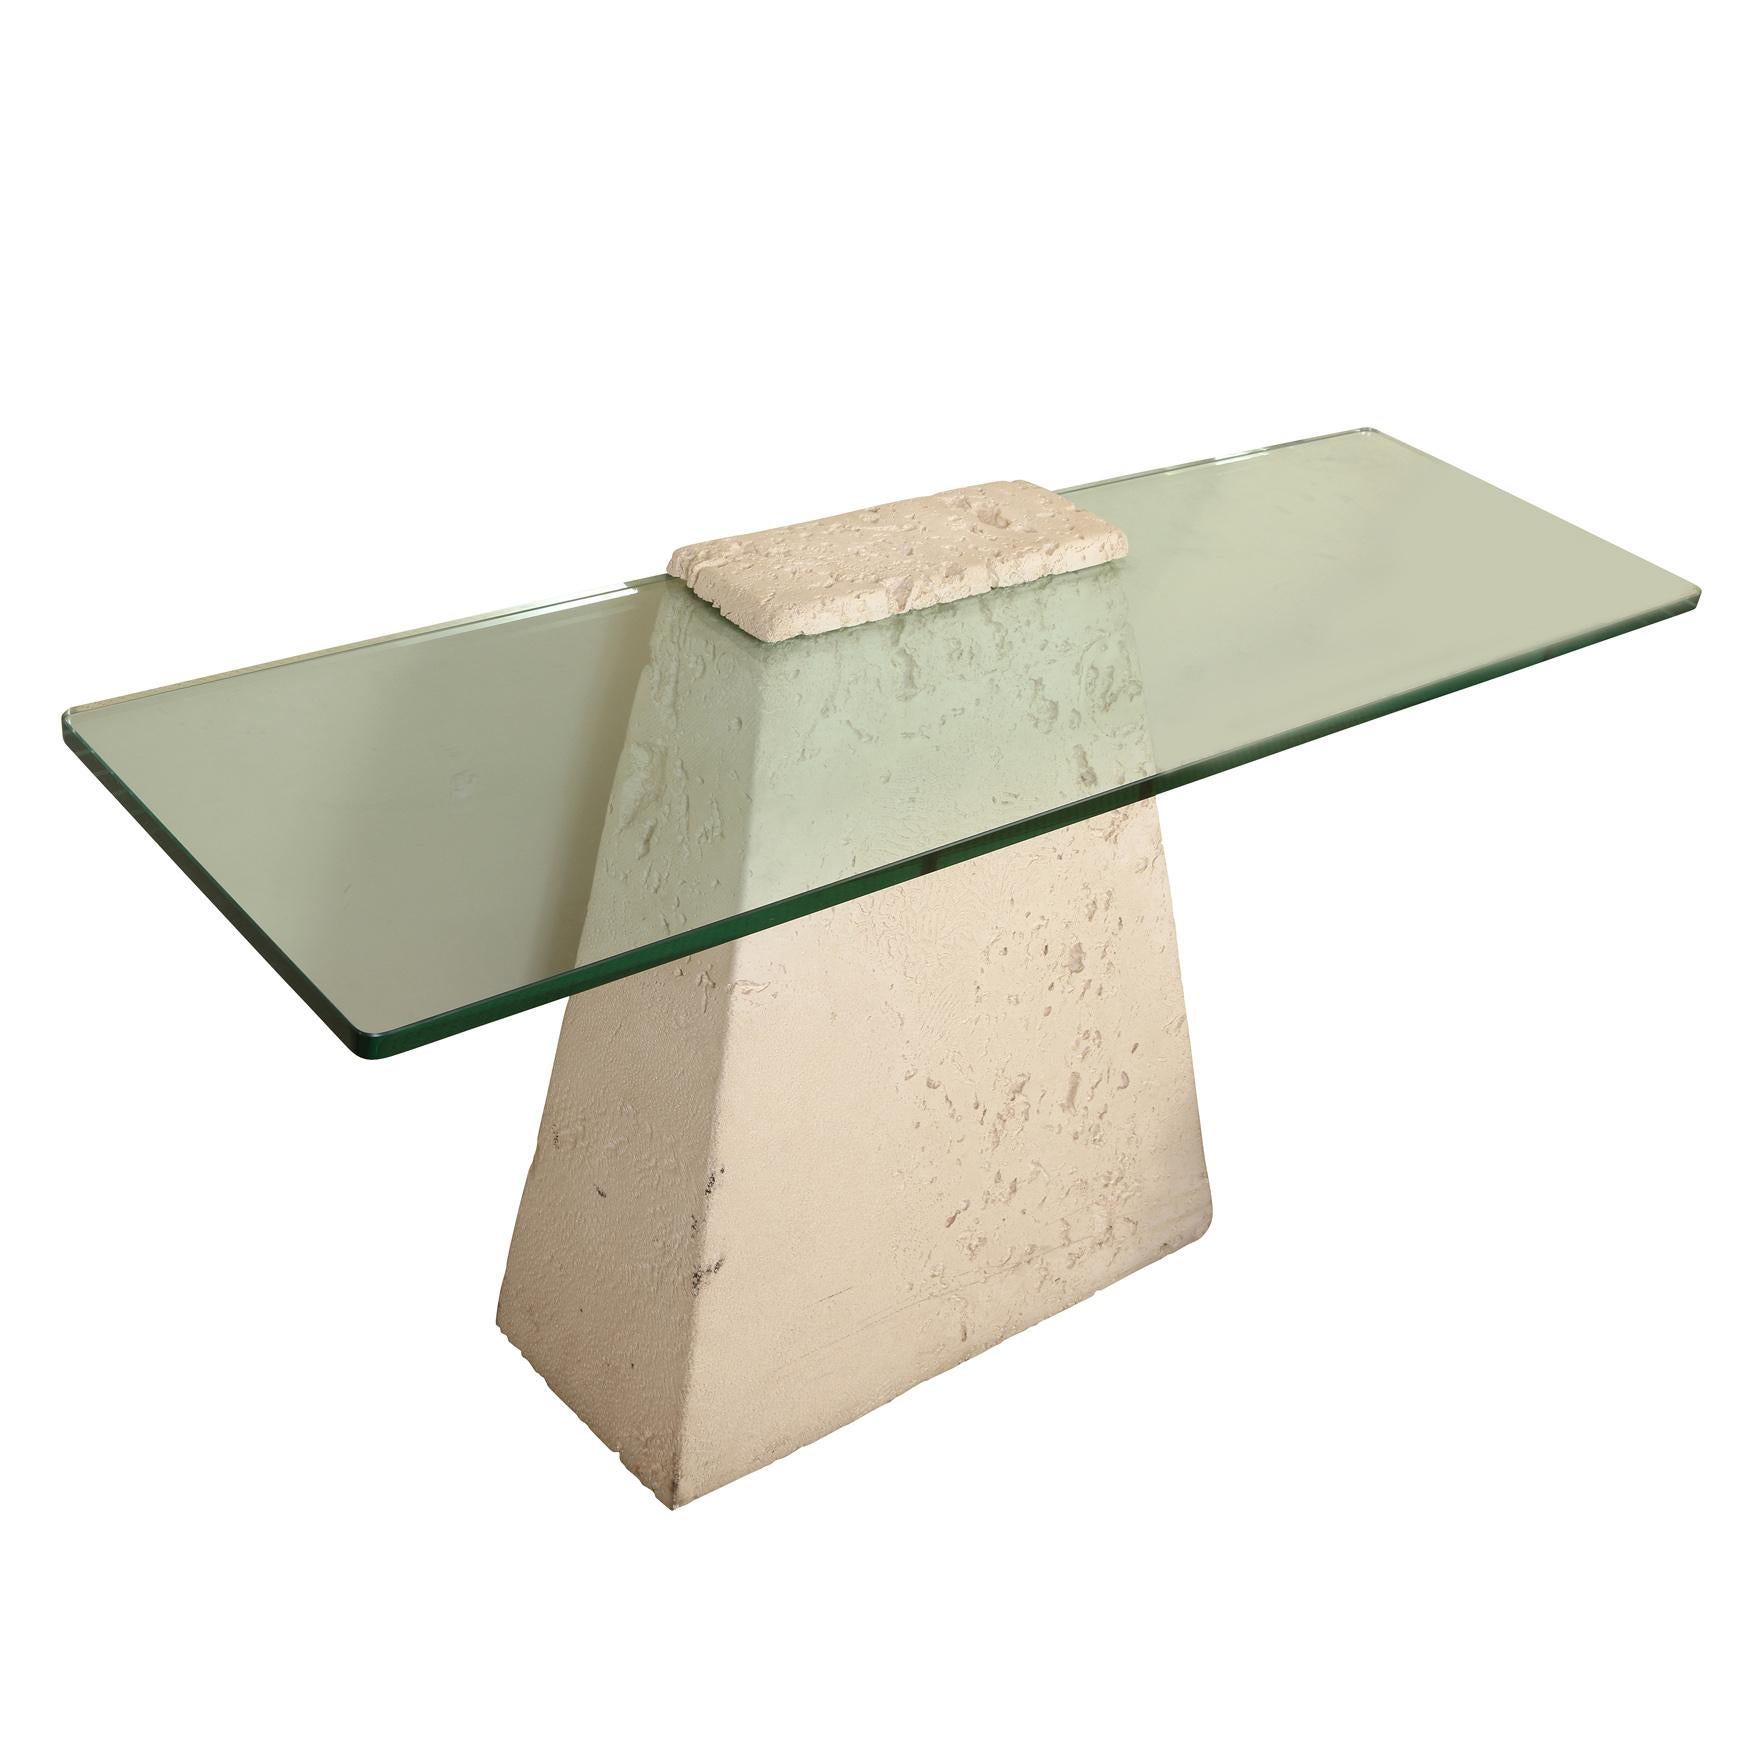 A contemporary style console table with an angular faux stone base and a glass top.